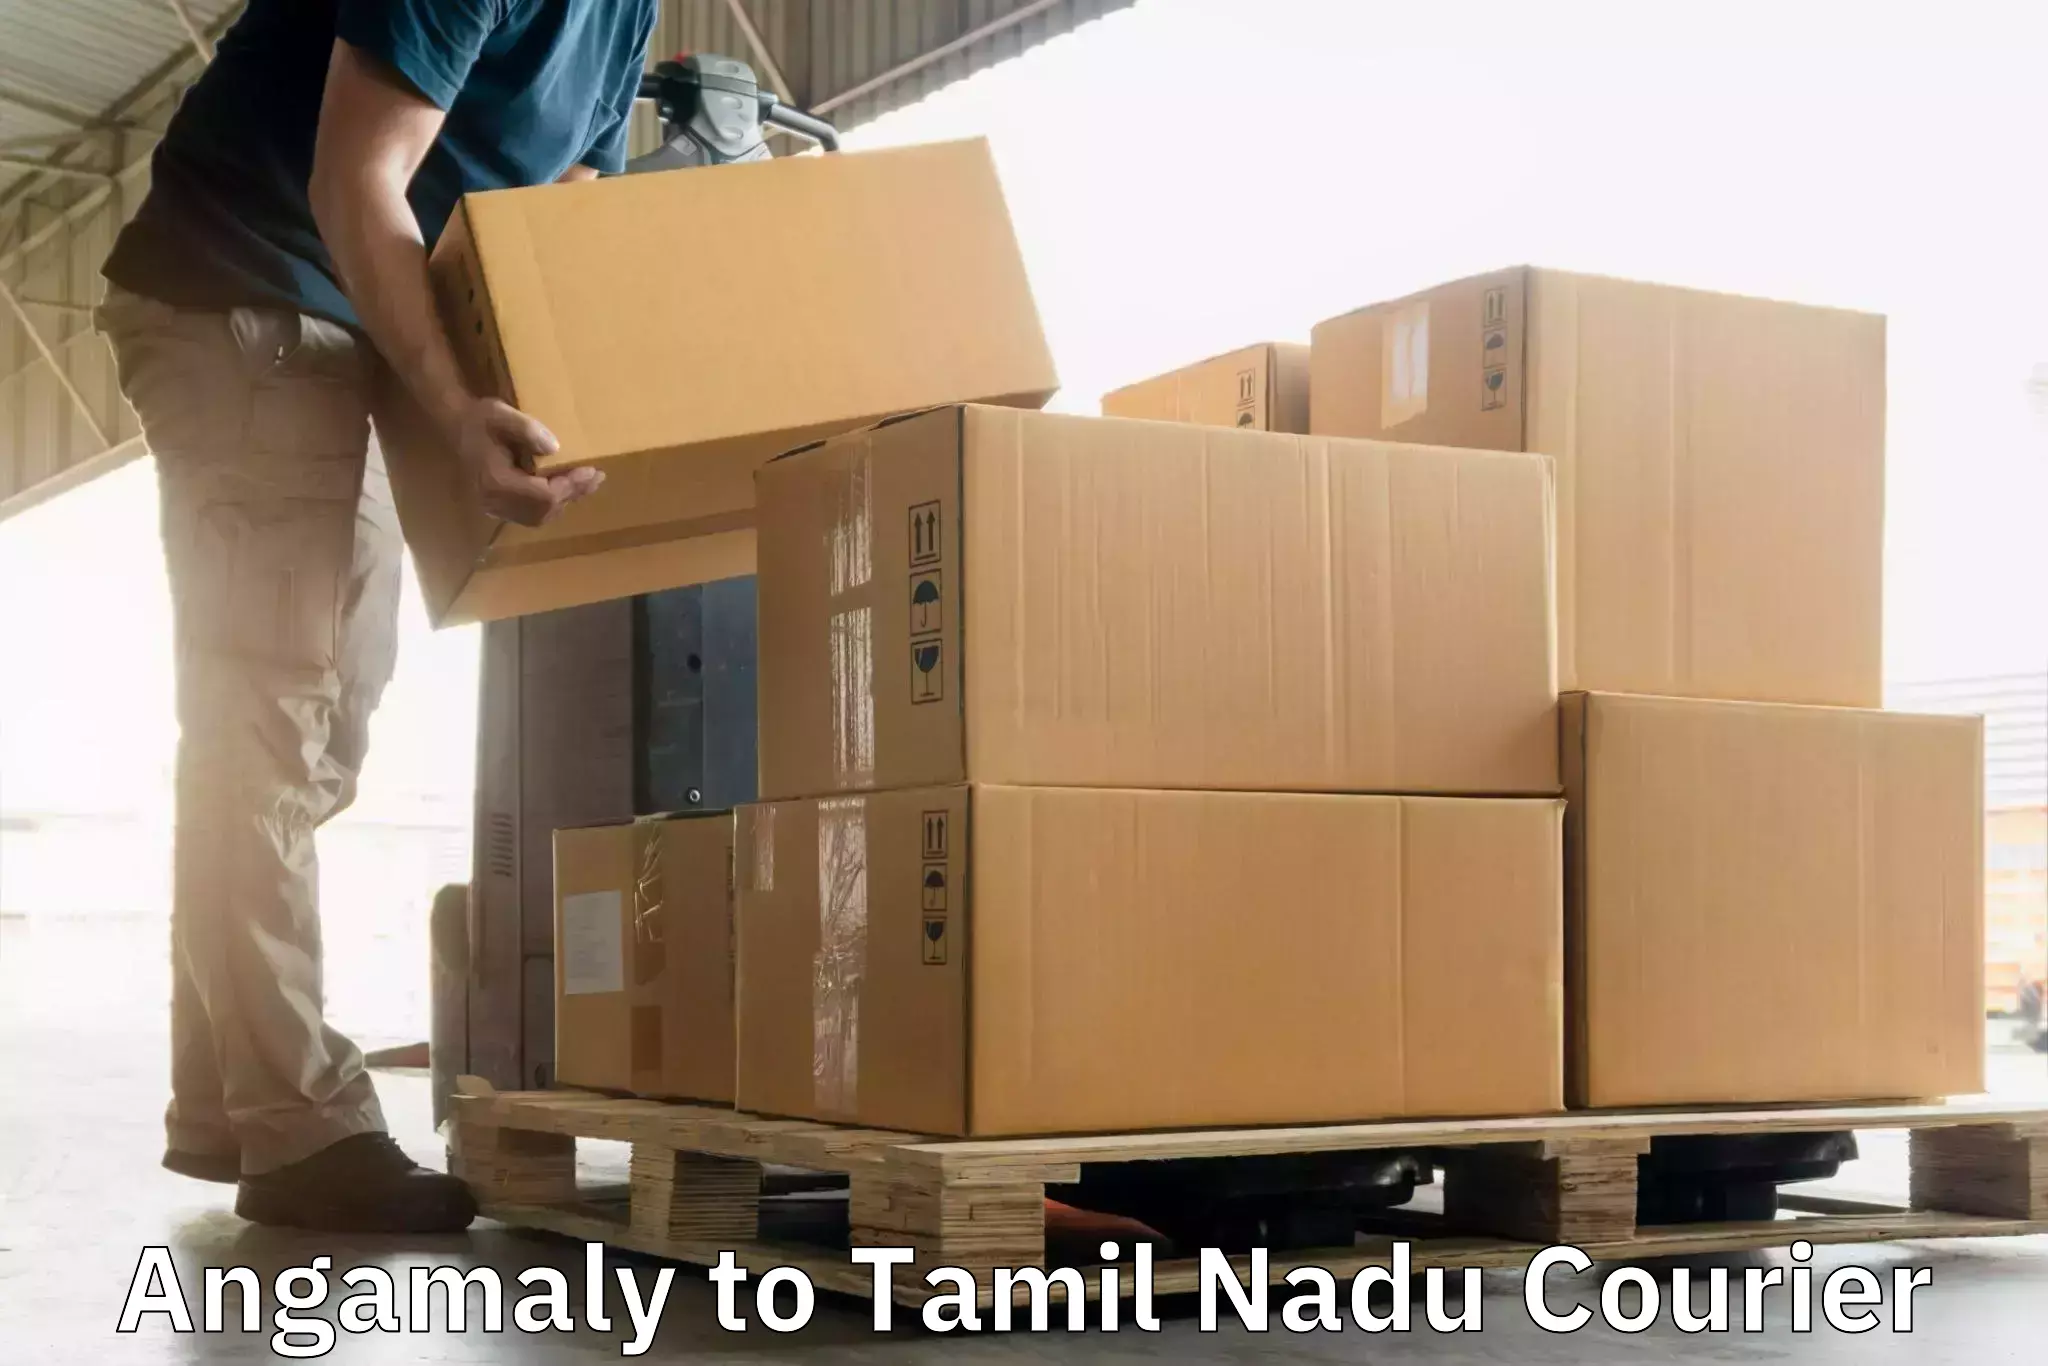 Global logistics network Angamaly to Tiruppur